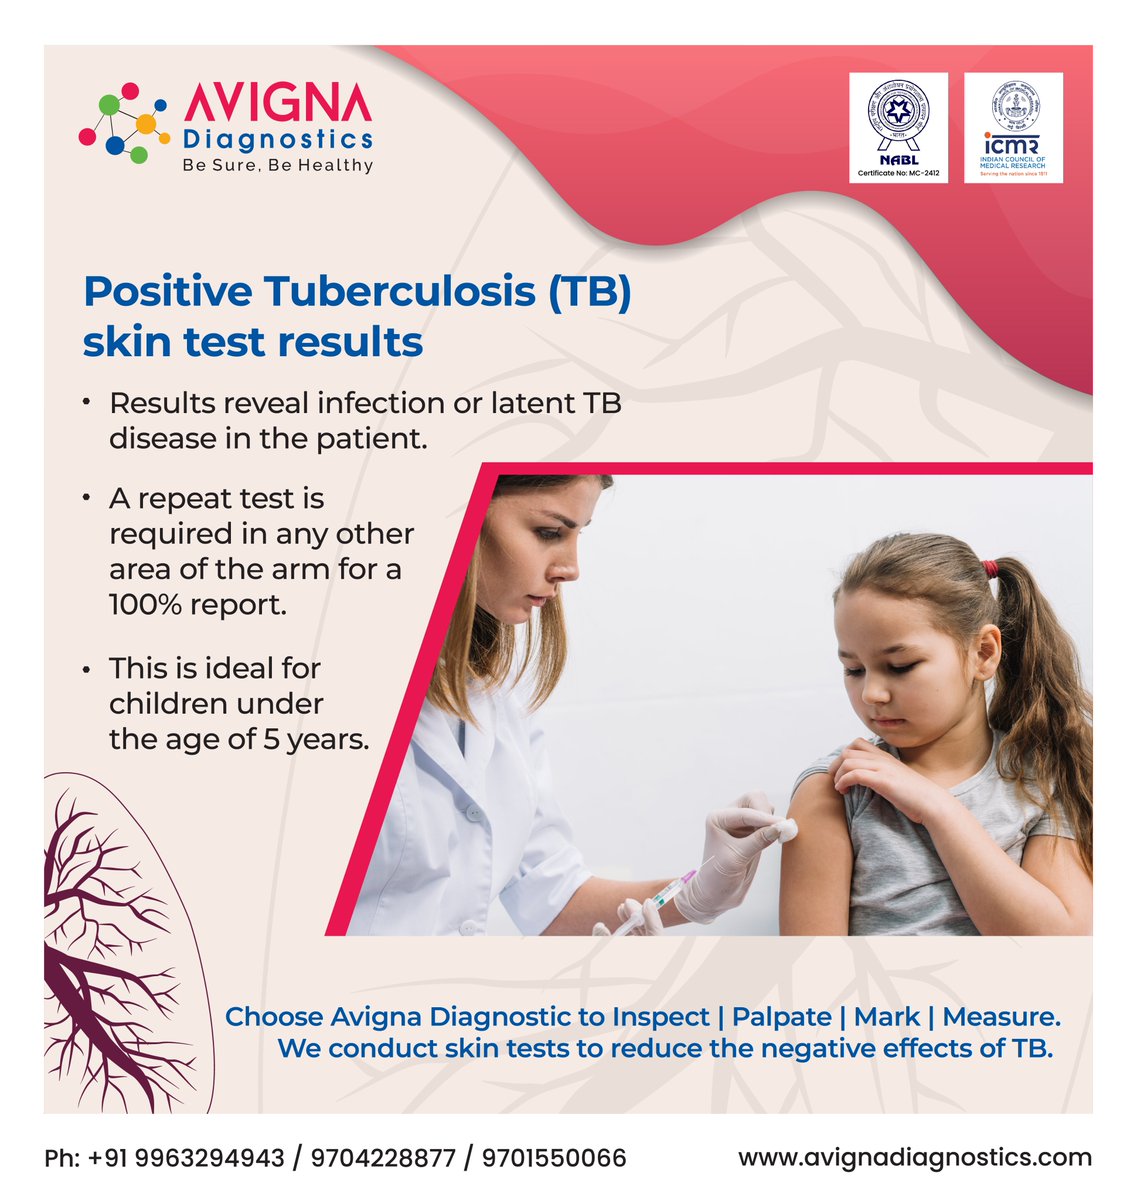 Positive Tuberculosis (TB) skin test results.
 
Choose Avigna Diagnostic to Inspect | Palpate | Mark | Measure. We conduct skin tests to reduce the negative effects of TB. 

#Tuberculosis #TB #SkinTest #SkinTests #Skin #HealthCare #AvignaDiagnostic #PregnantWomen